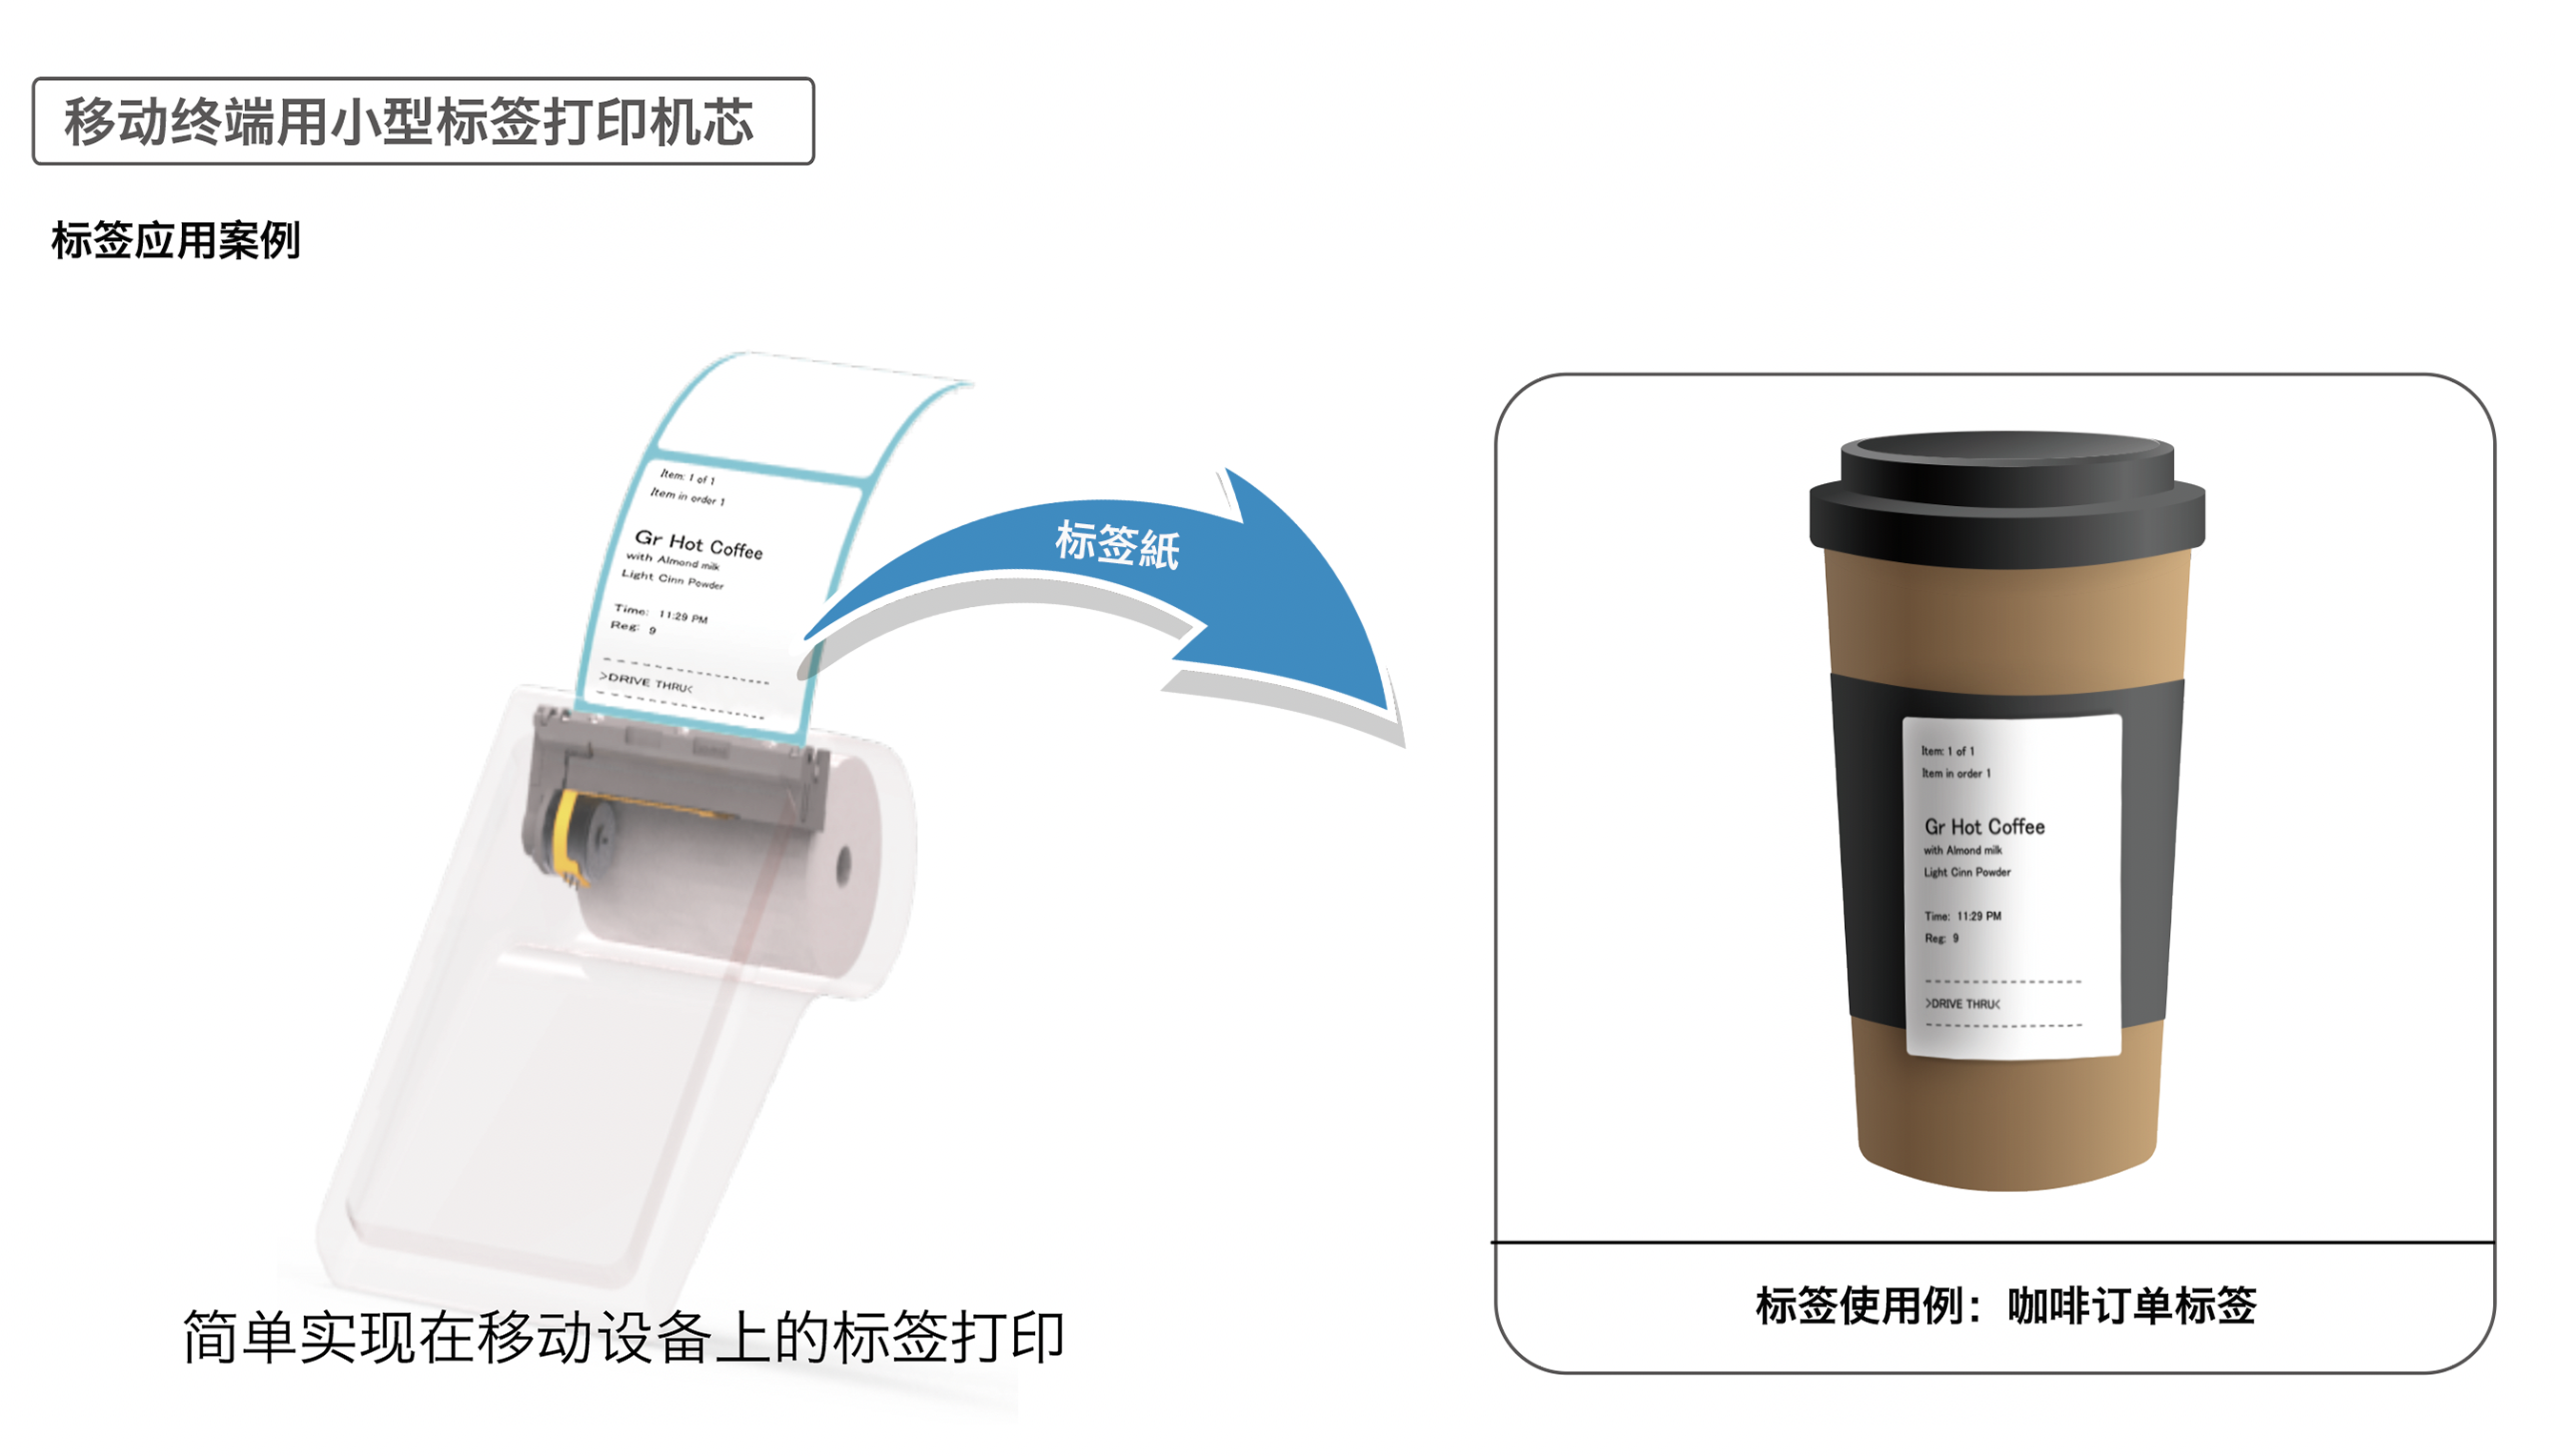 Ultra-compact mechanism for label printing mobile terminal